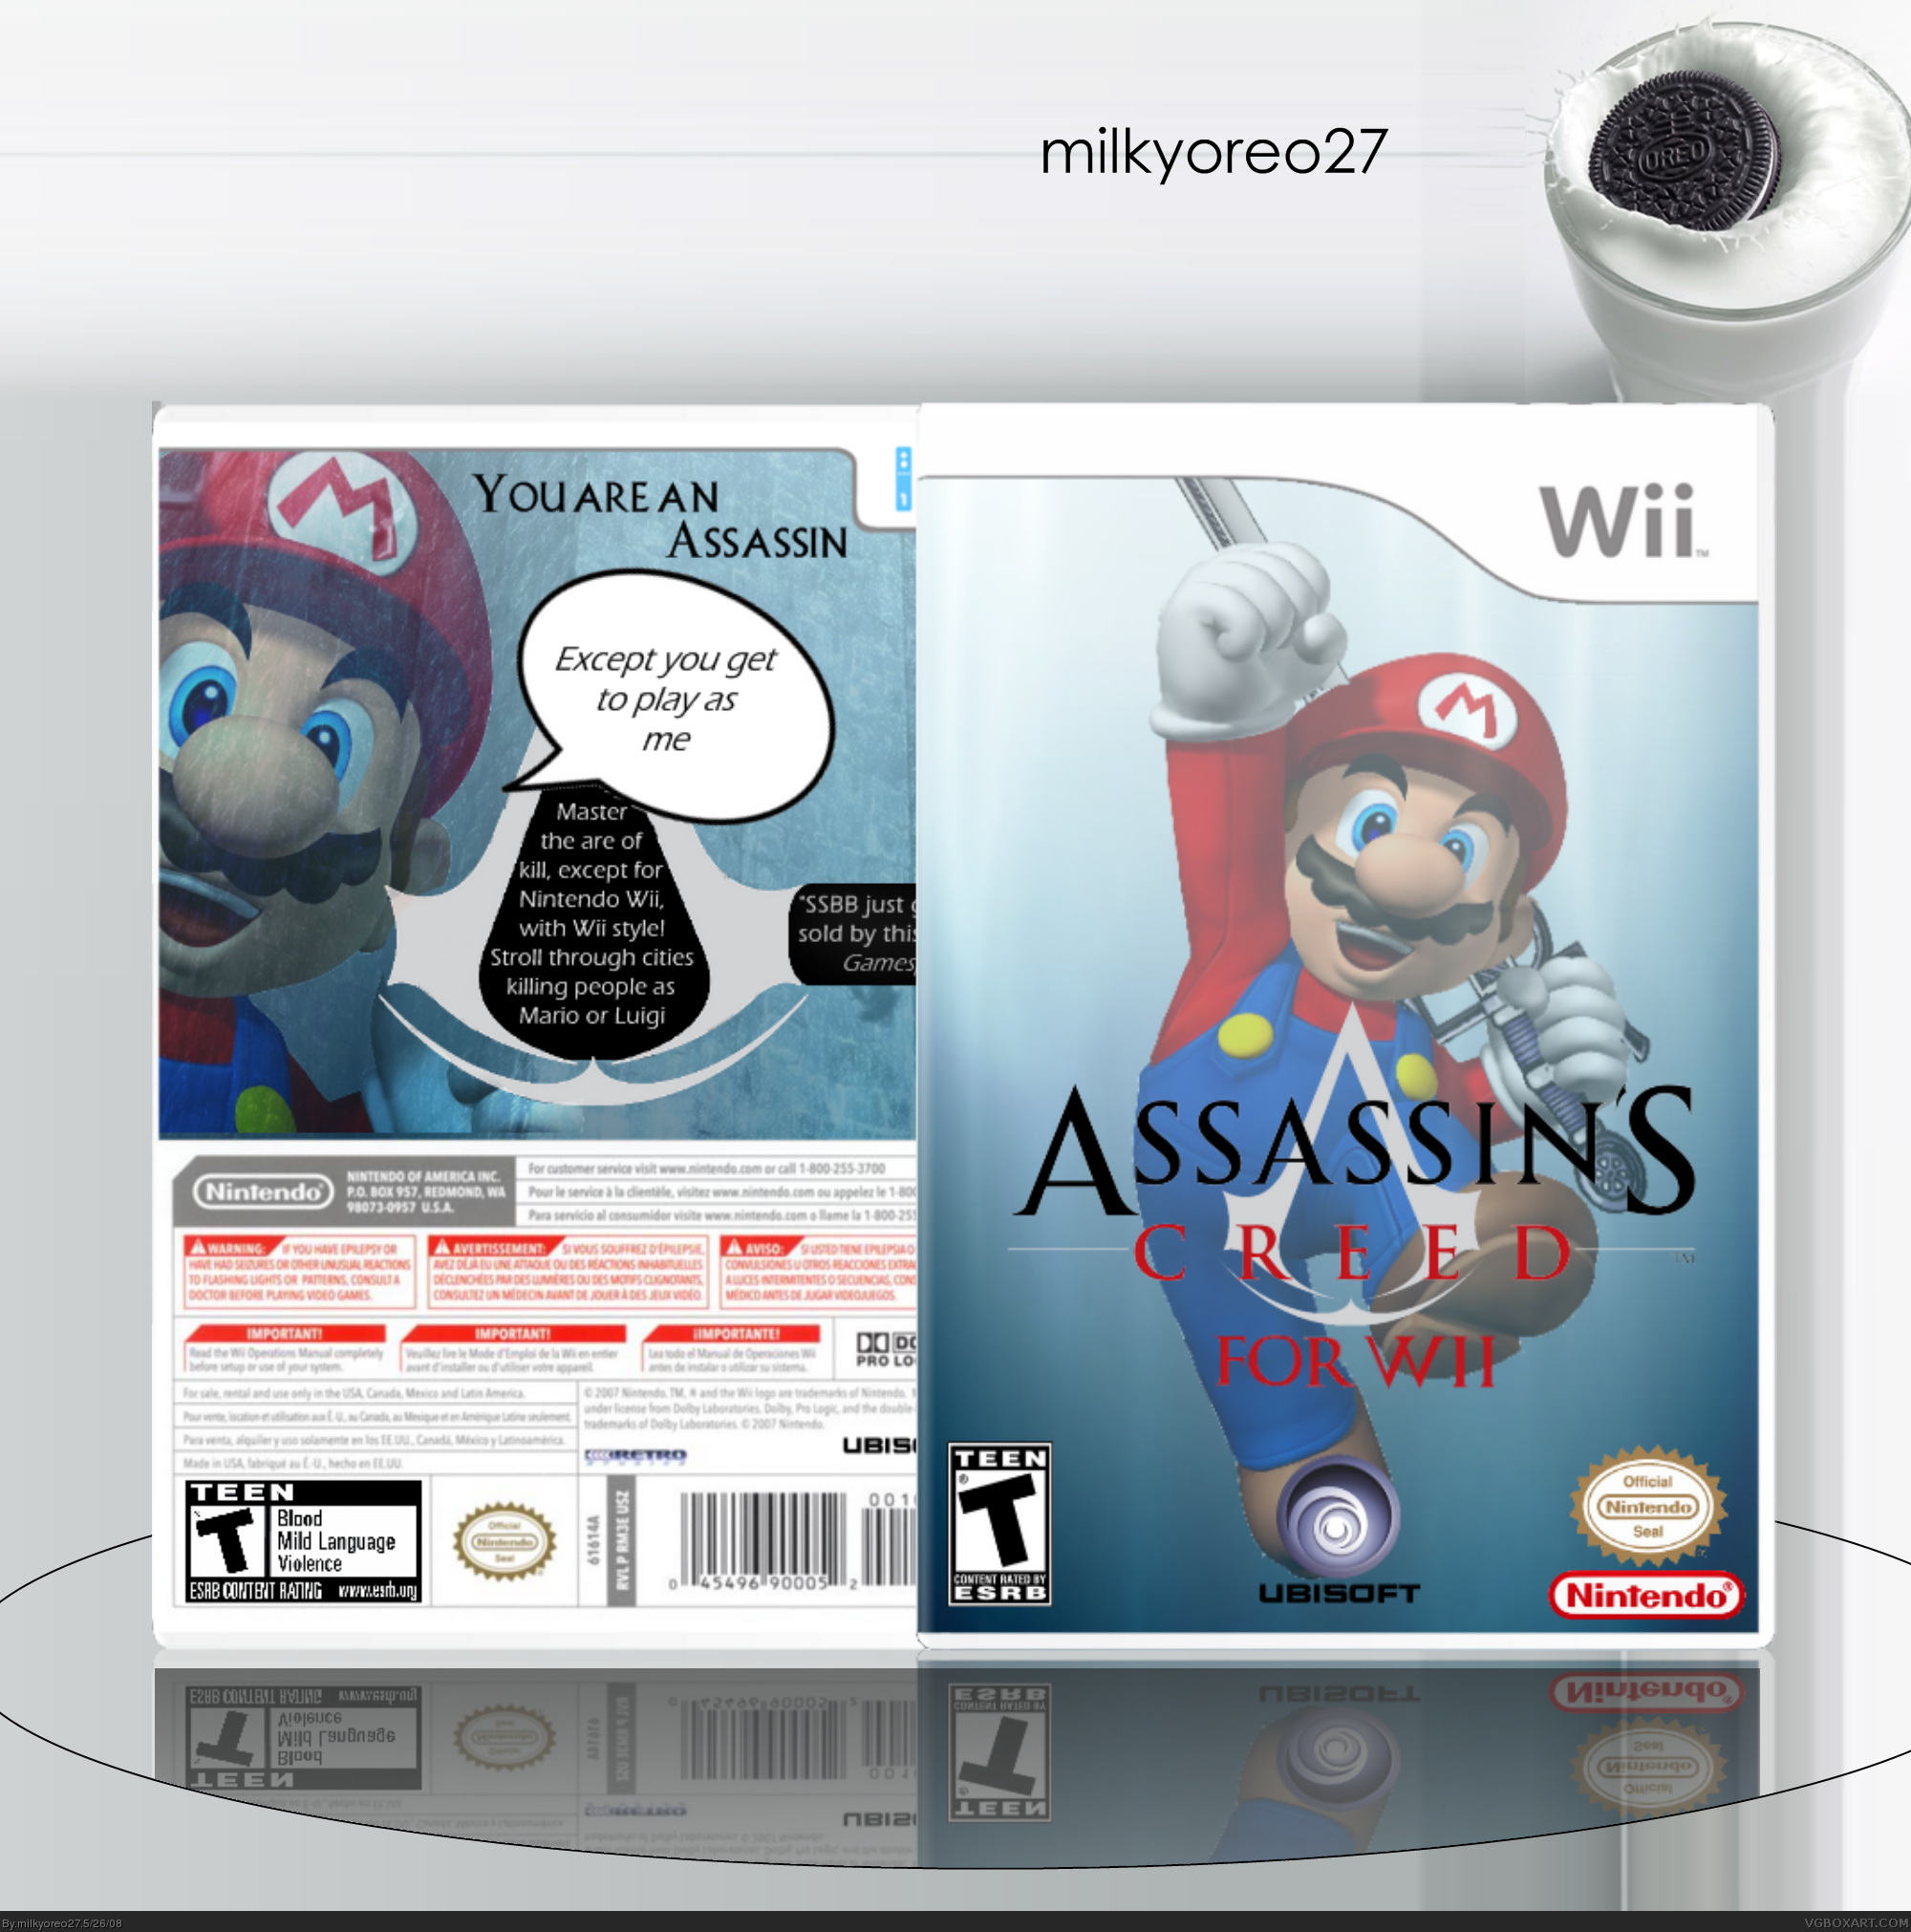 Assassin's Creed for Nintendo Wii box cover